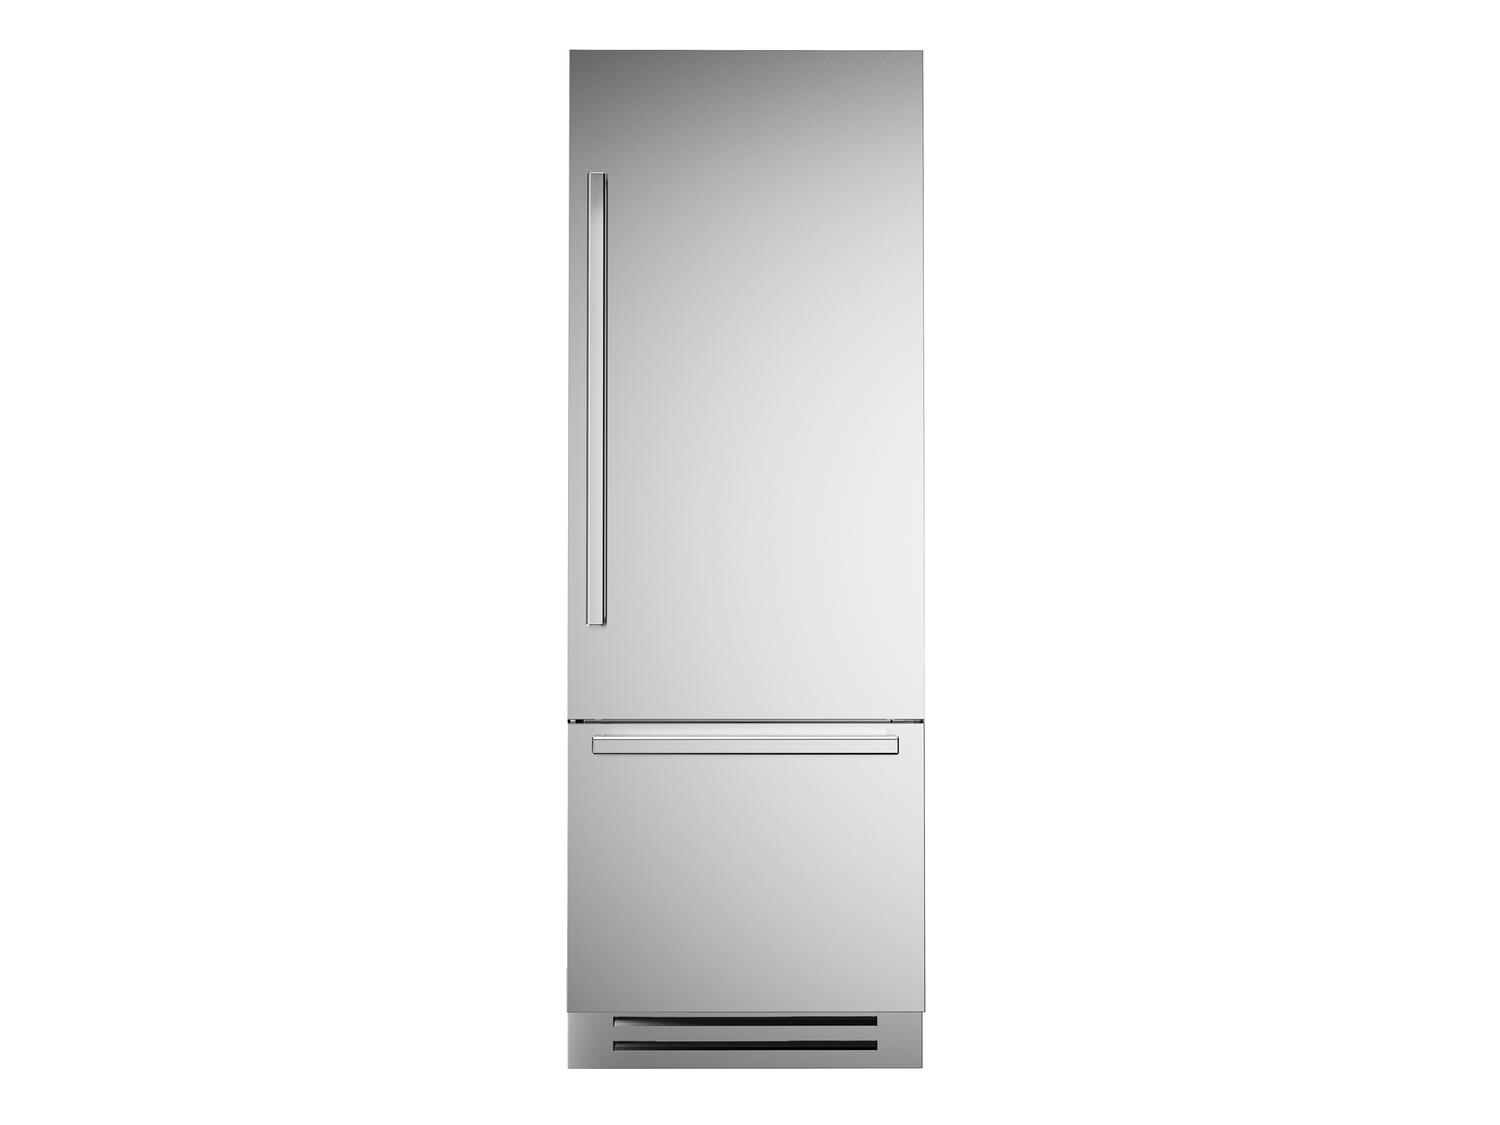 Bertazzoni REF30BMBIXRT 30 Inch Built-In Bottom Mount Refrigerator With Ice Maker, Stainless Steel Stainless Steel